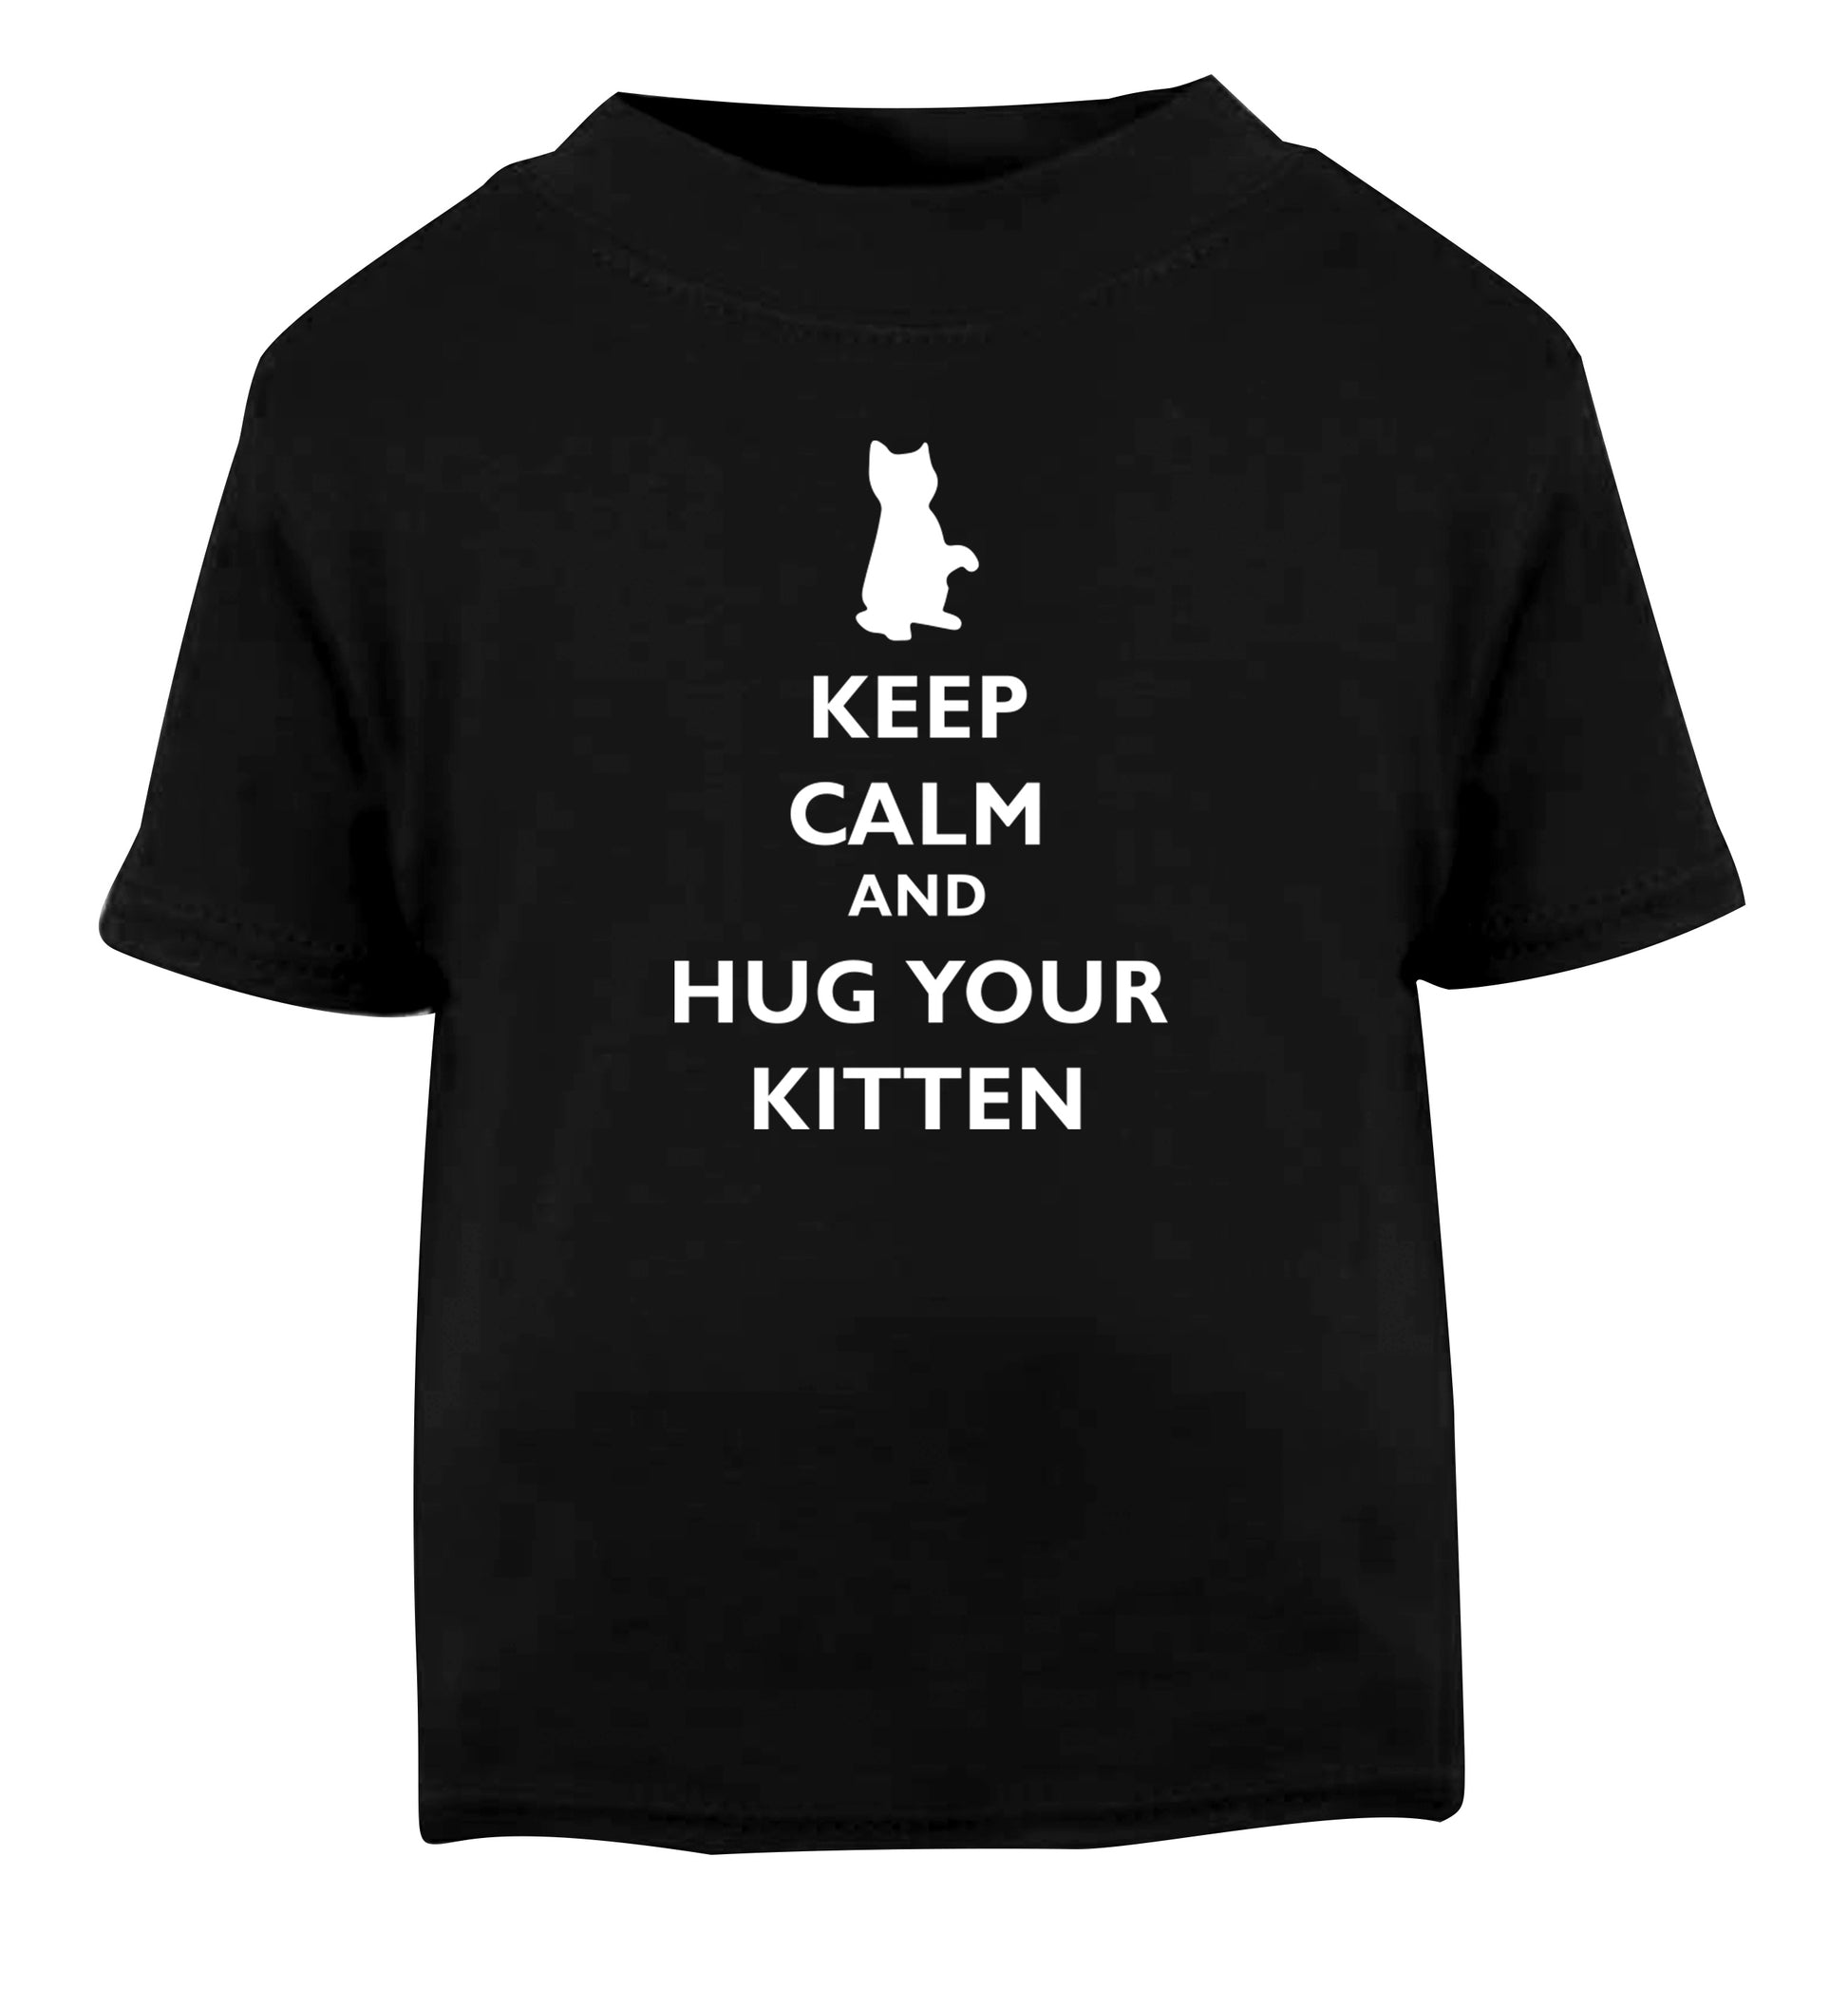 Keep calm and hug your kitten Black Baby Toddler Tshirt 2 years